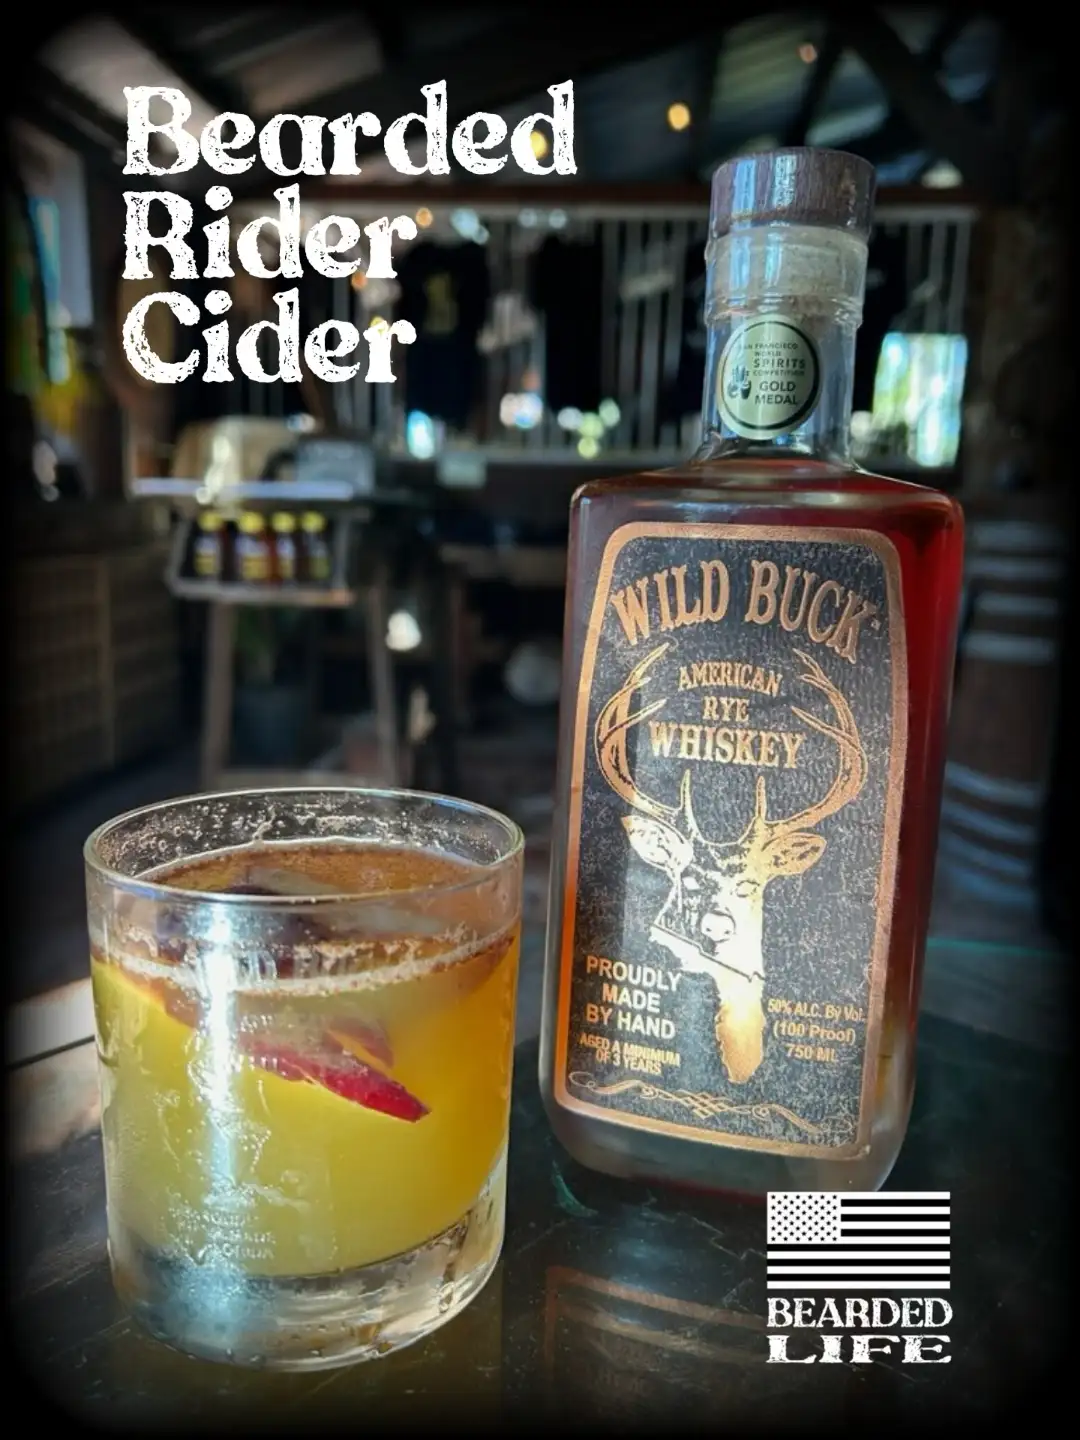 Bearded Rider Cider Cocktail